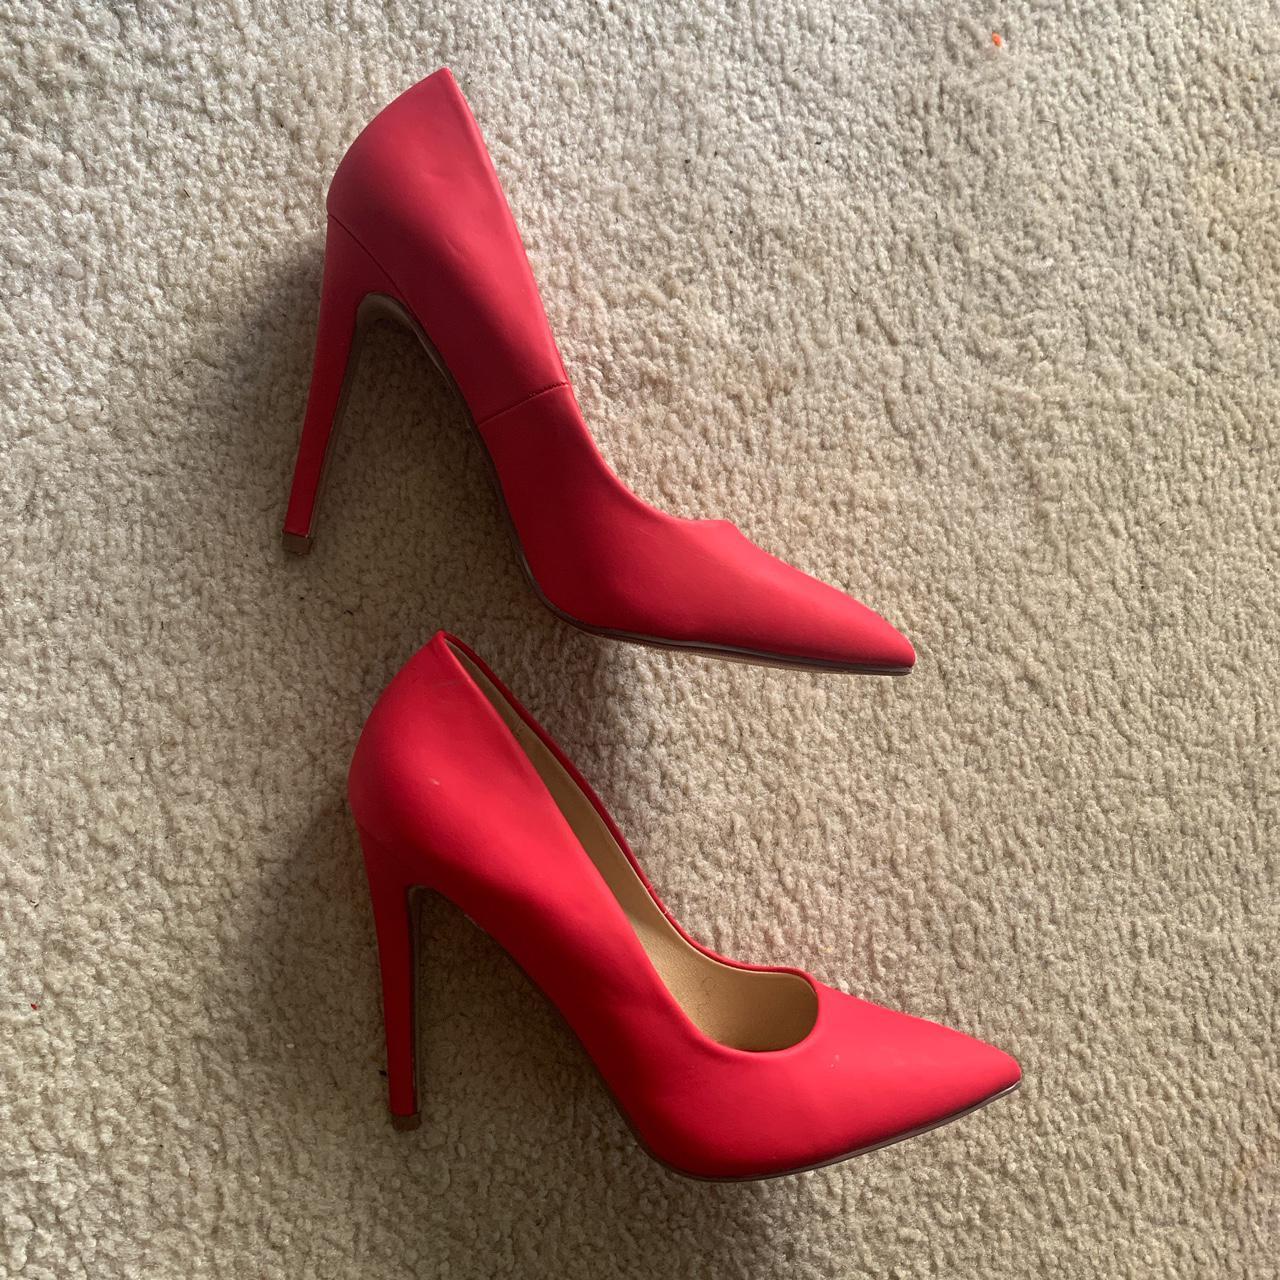 Product Image 2 - RED DOLLHOUSE STILETTO HEELS ❤️
size: